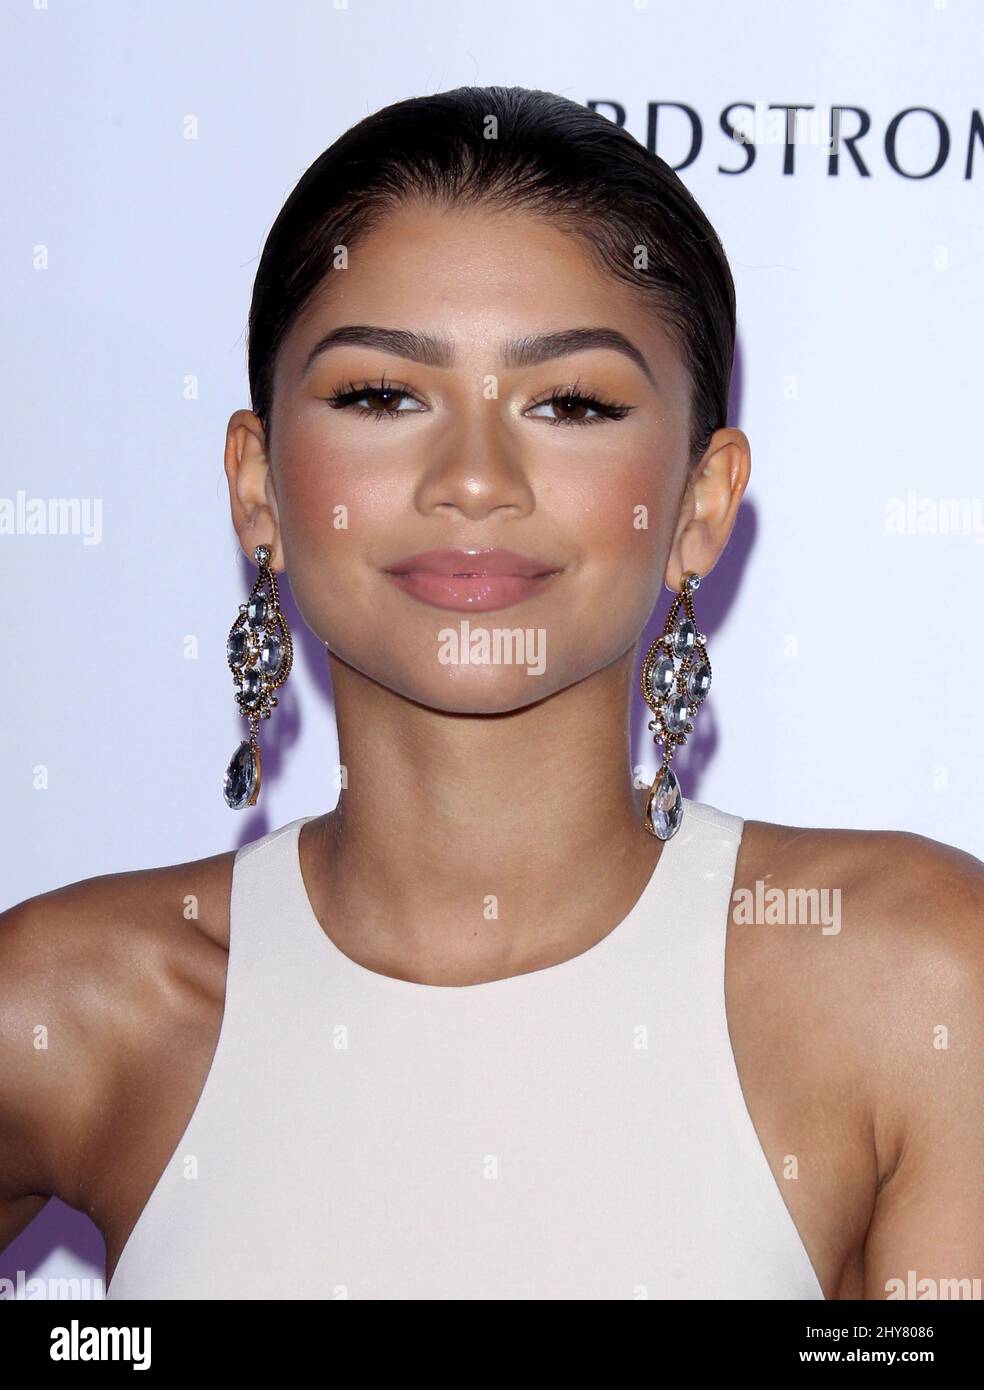 Zendaya Coleman attending a photocall at Nordstrom Del Amo Fashion ...